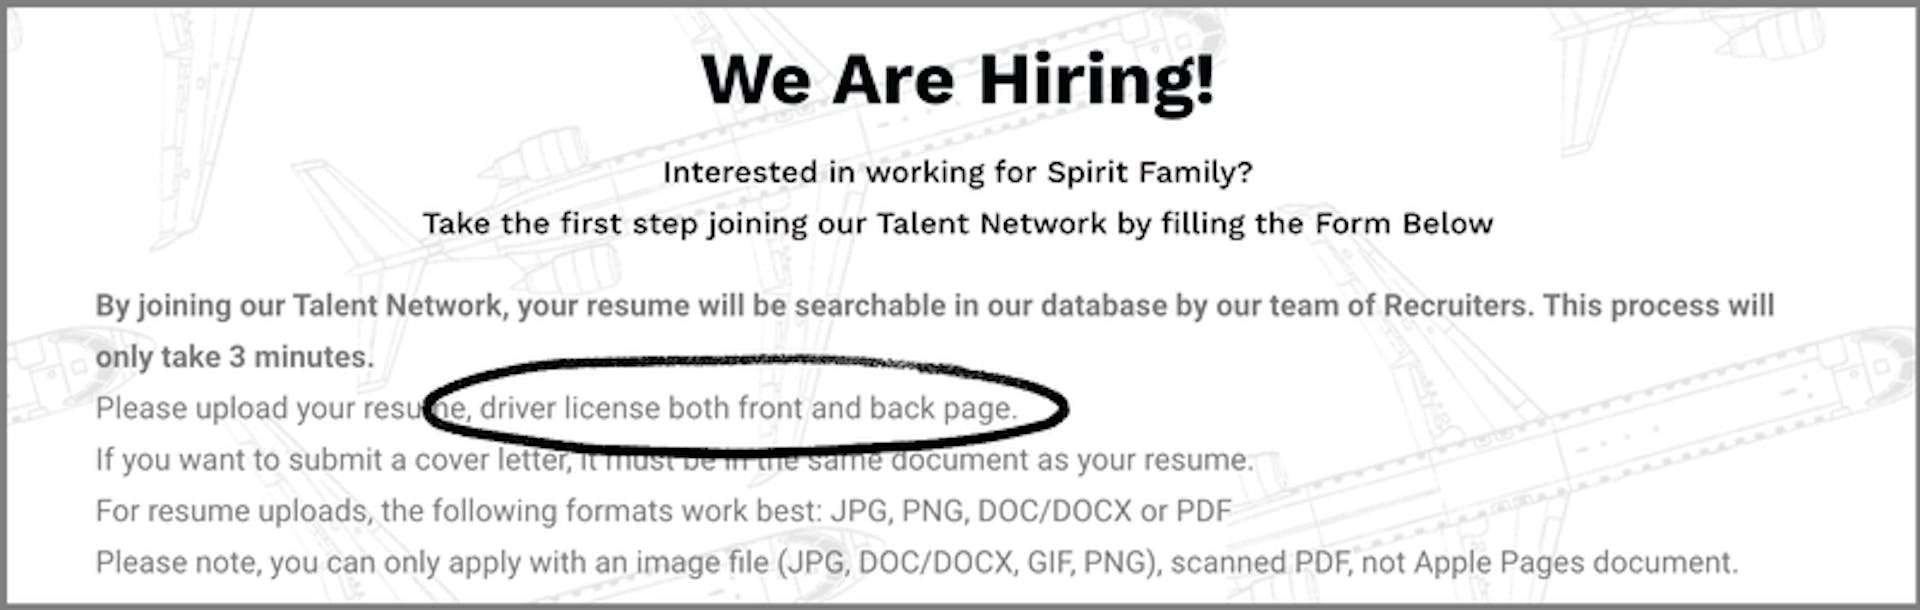 A phony website purporting to be the Spirit Airlines careers site asks for the applicant’s driver’s license as part of the initial application process